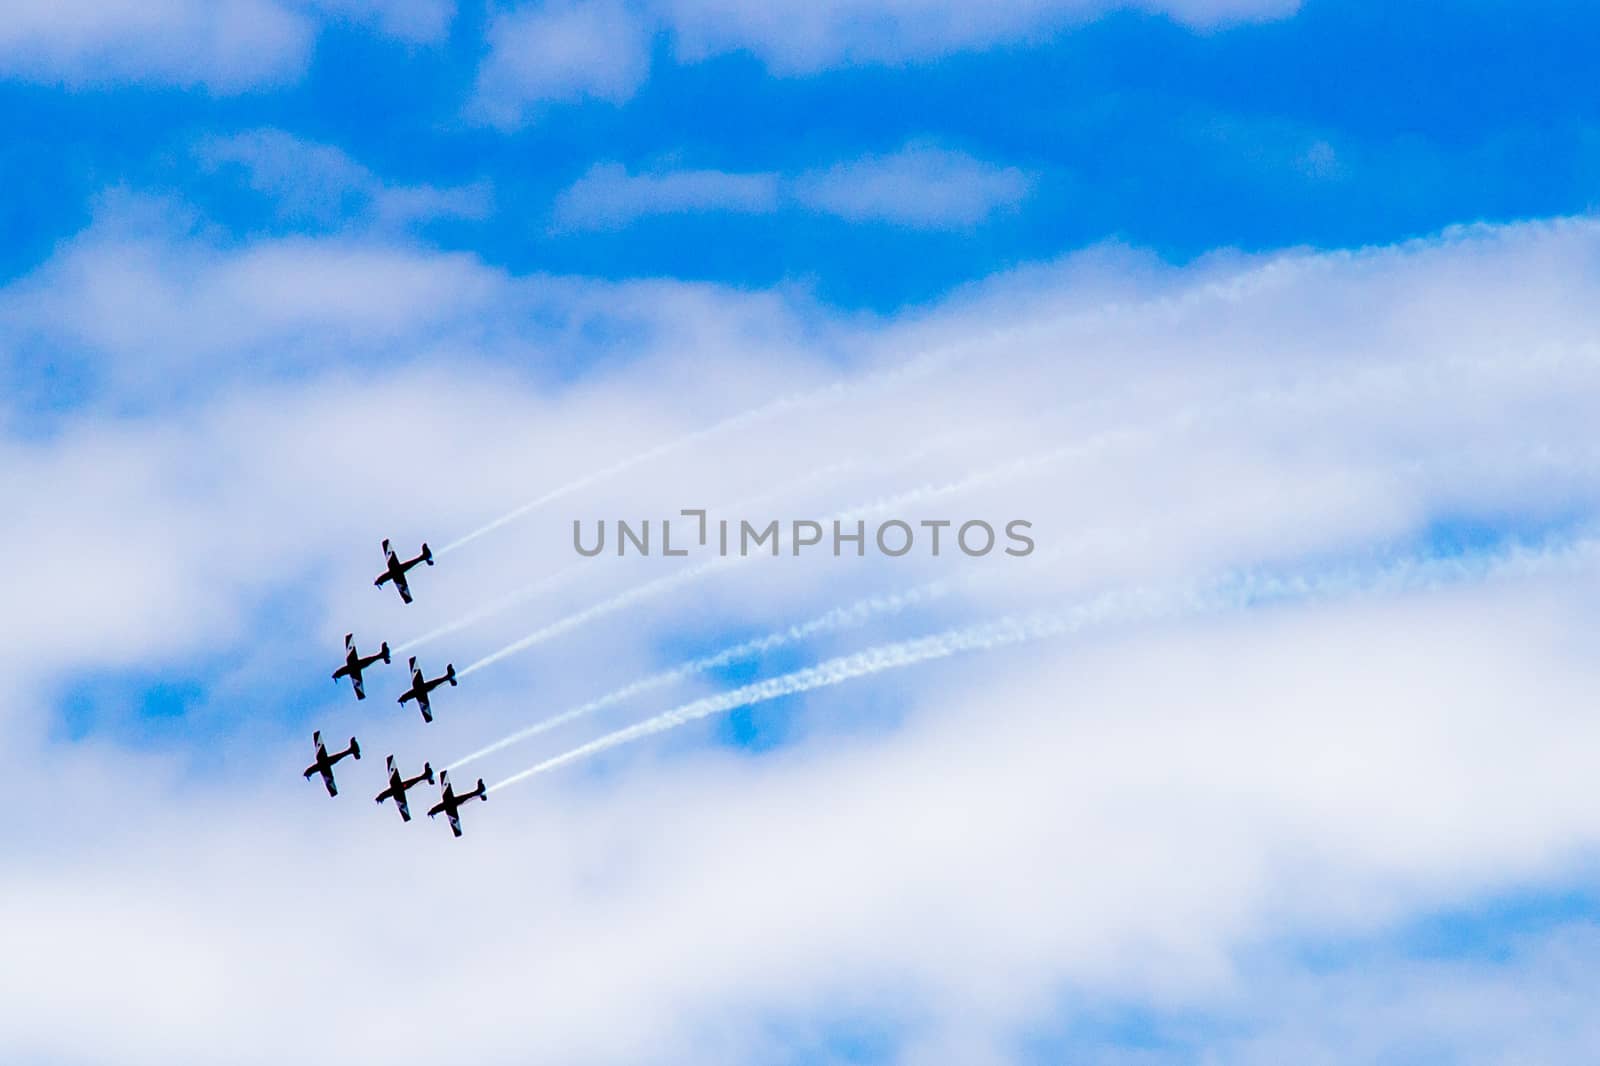 The Roulettes in Blue Sky by danieldep